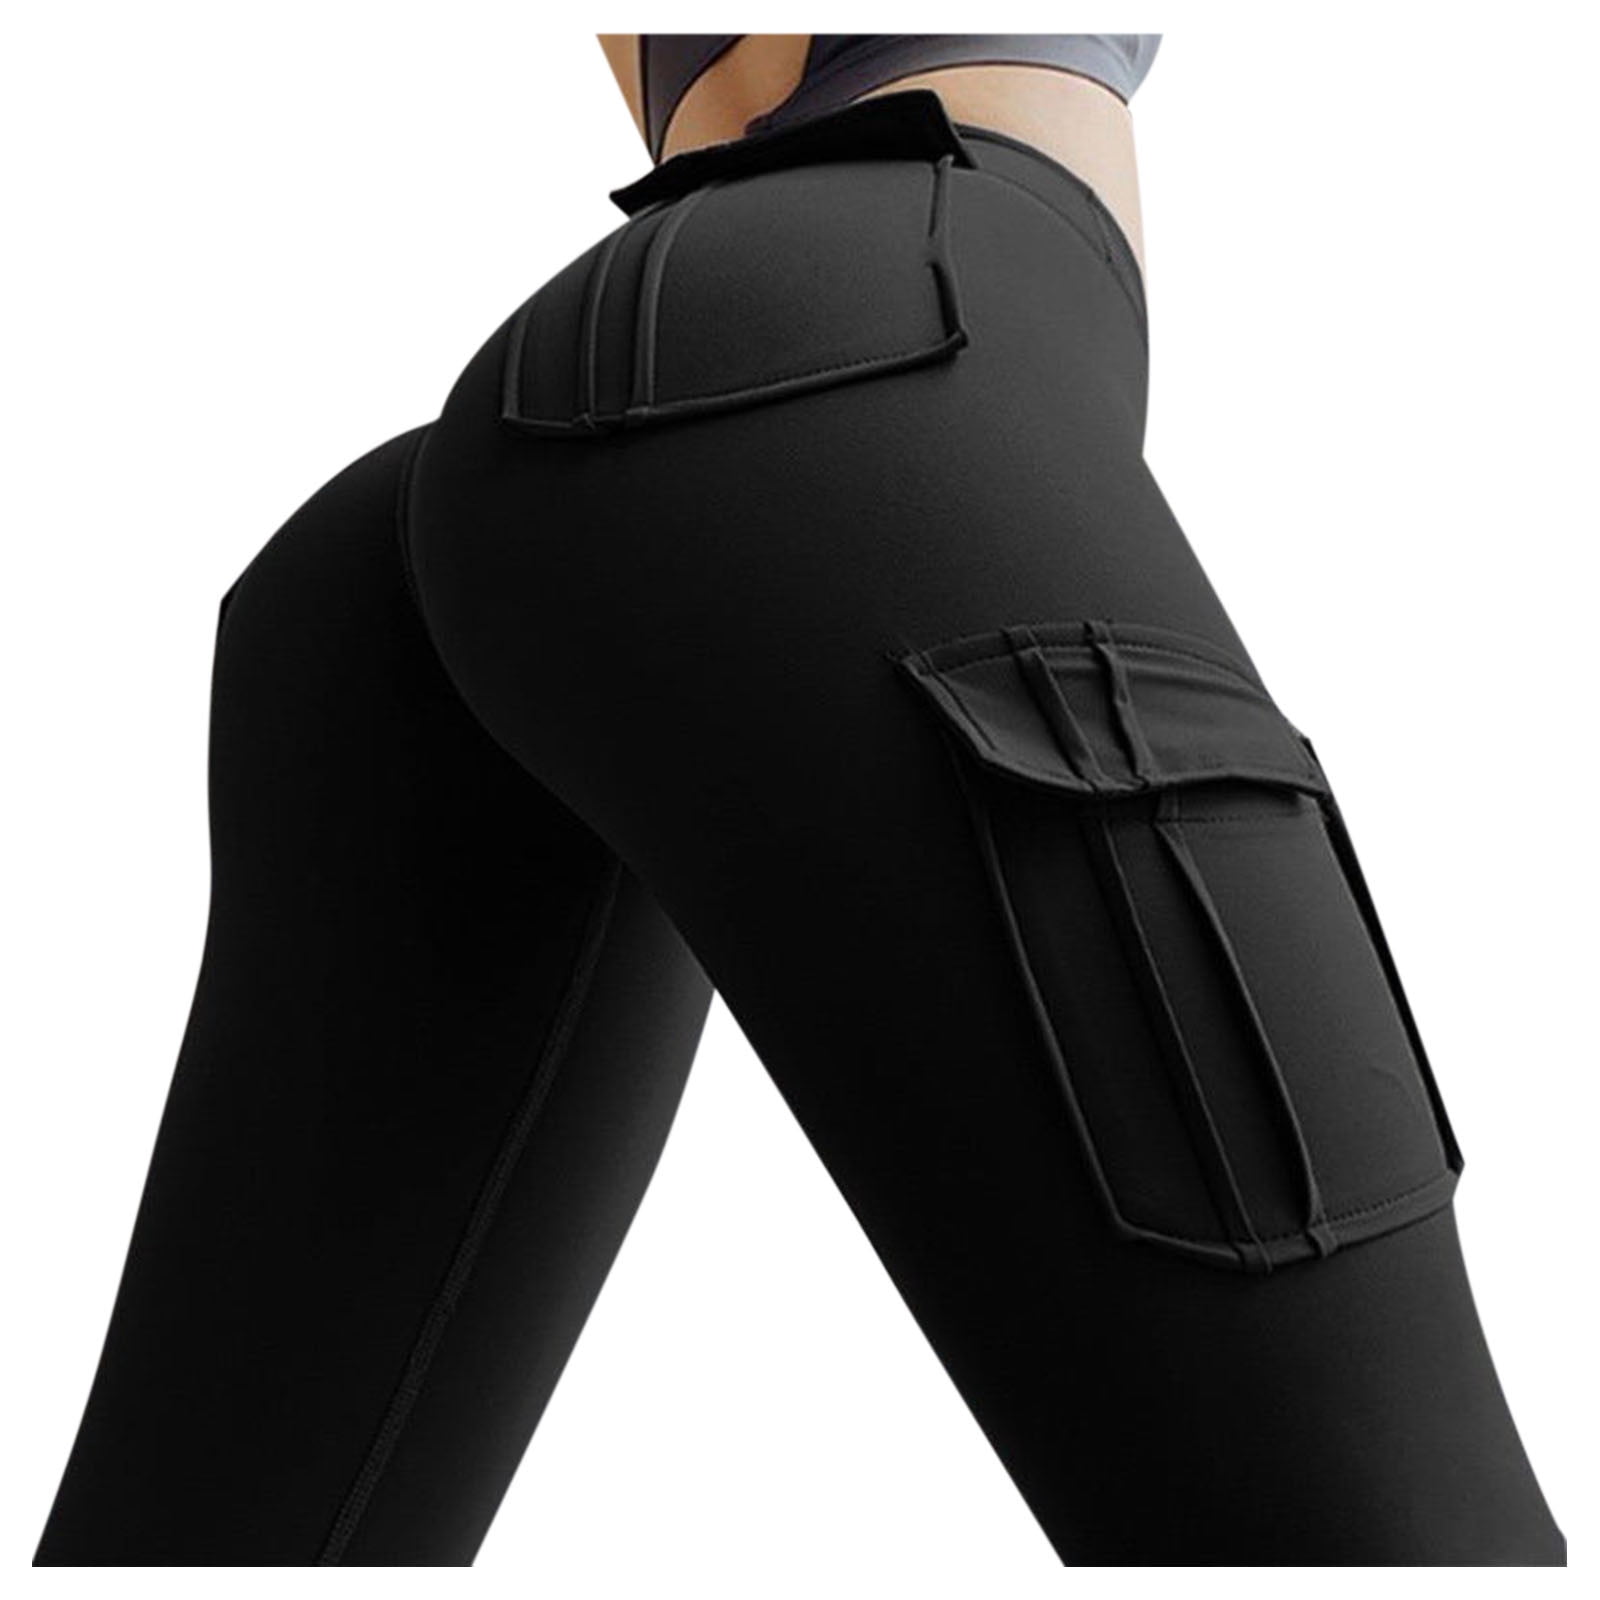 Leggings for Women High Waist Lifting with Pockets Yoga Workout Cargo ...